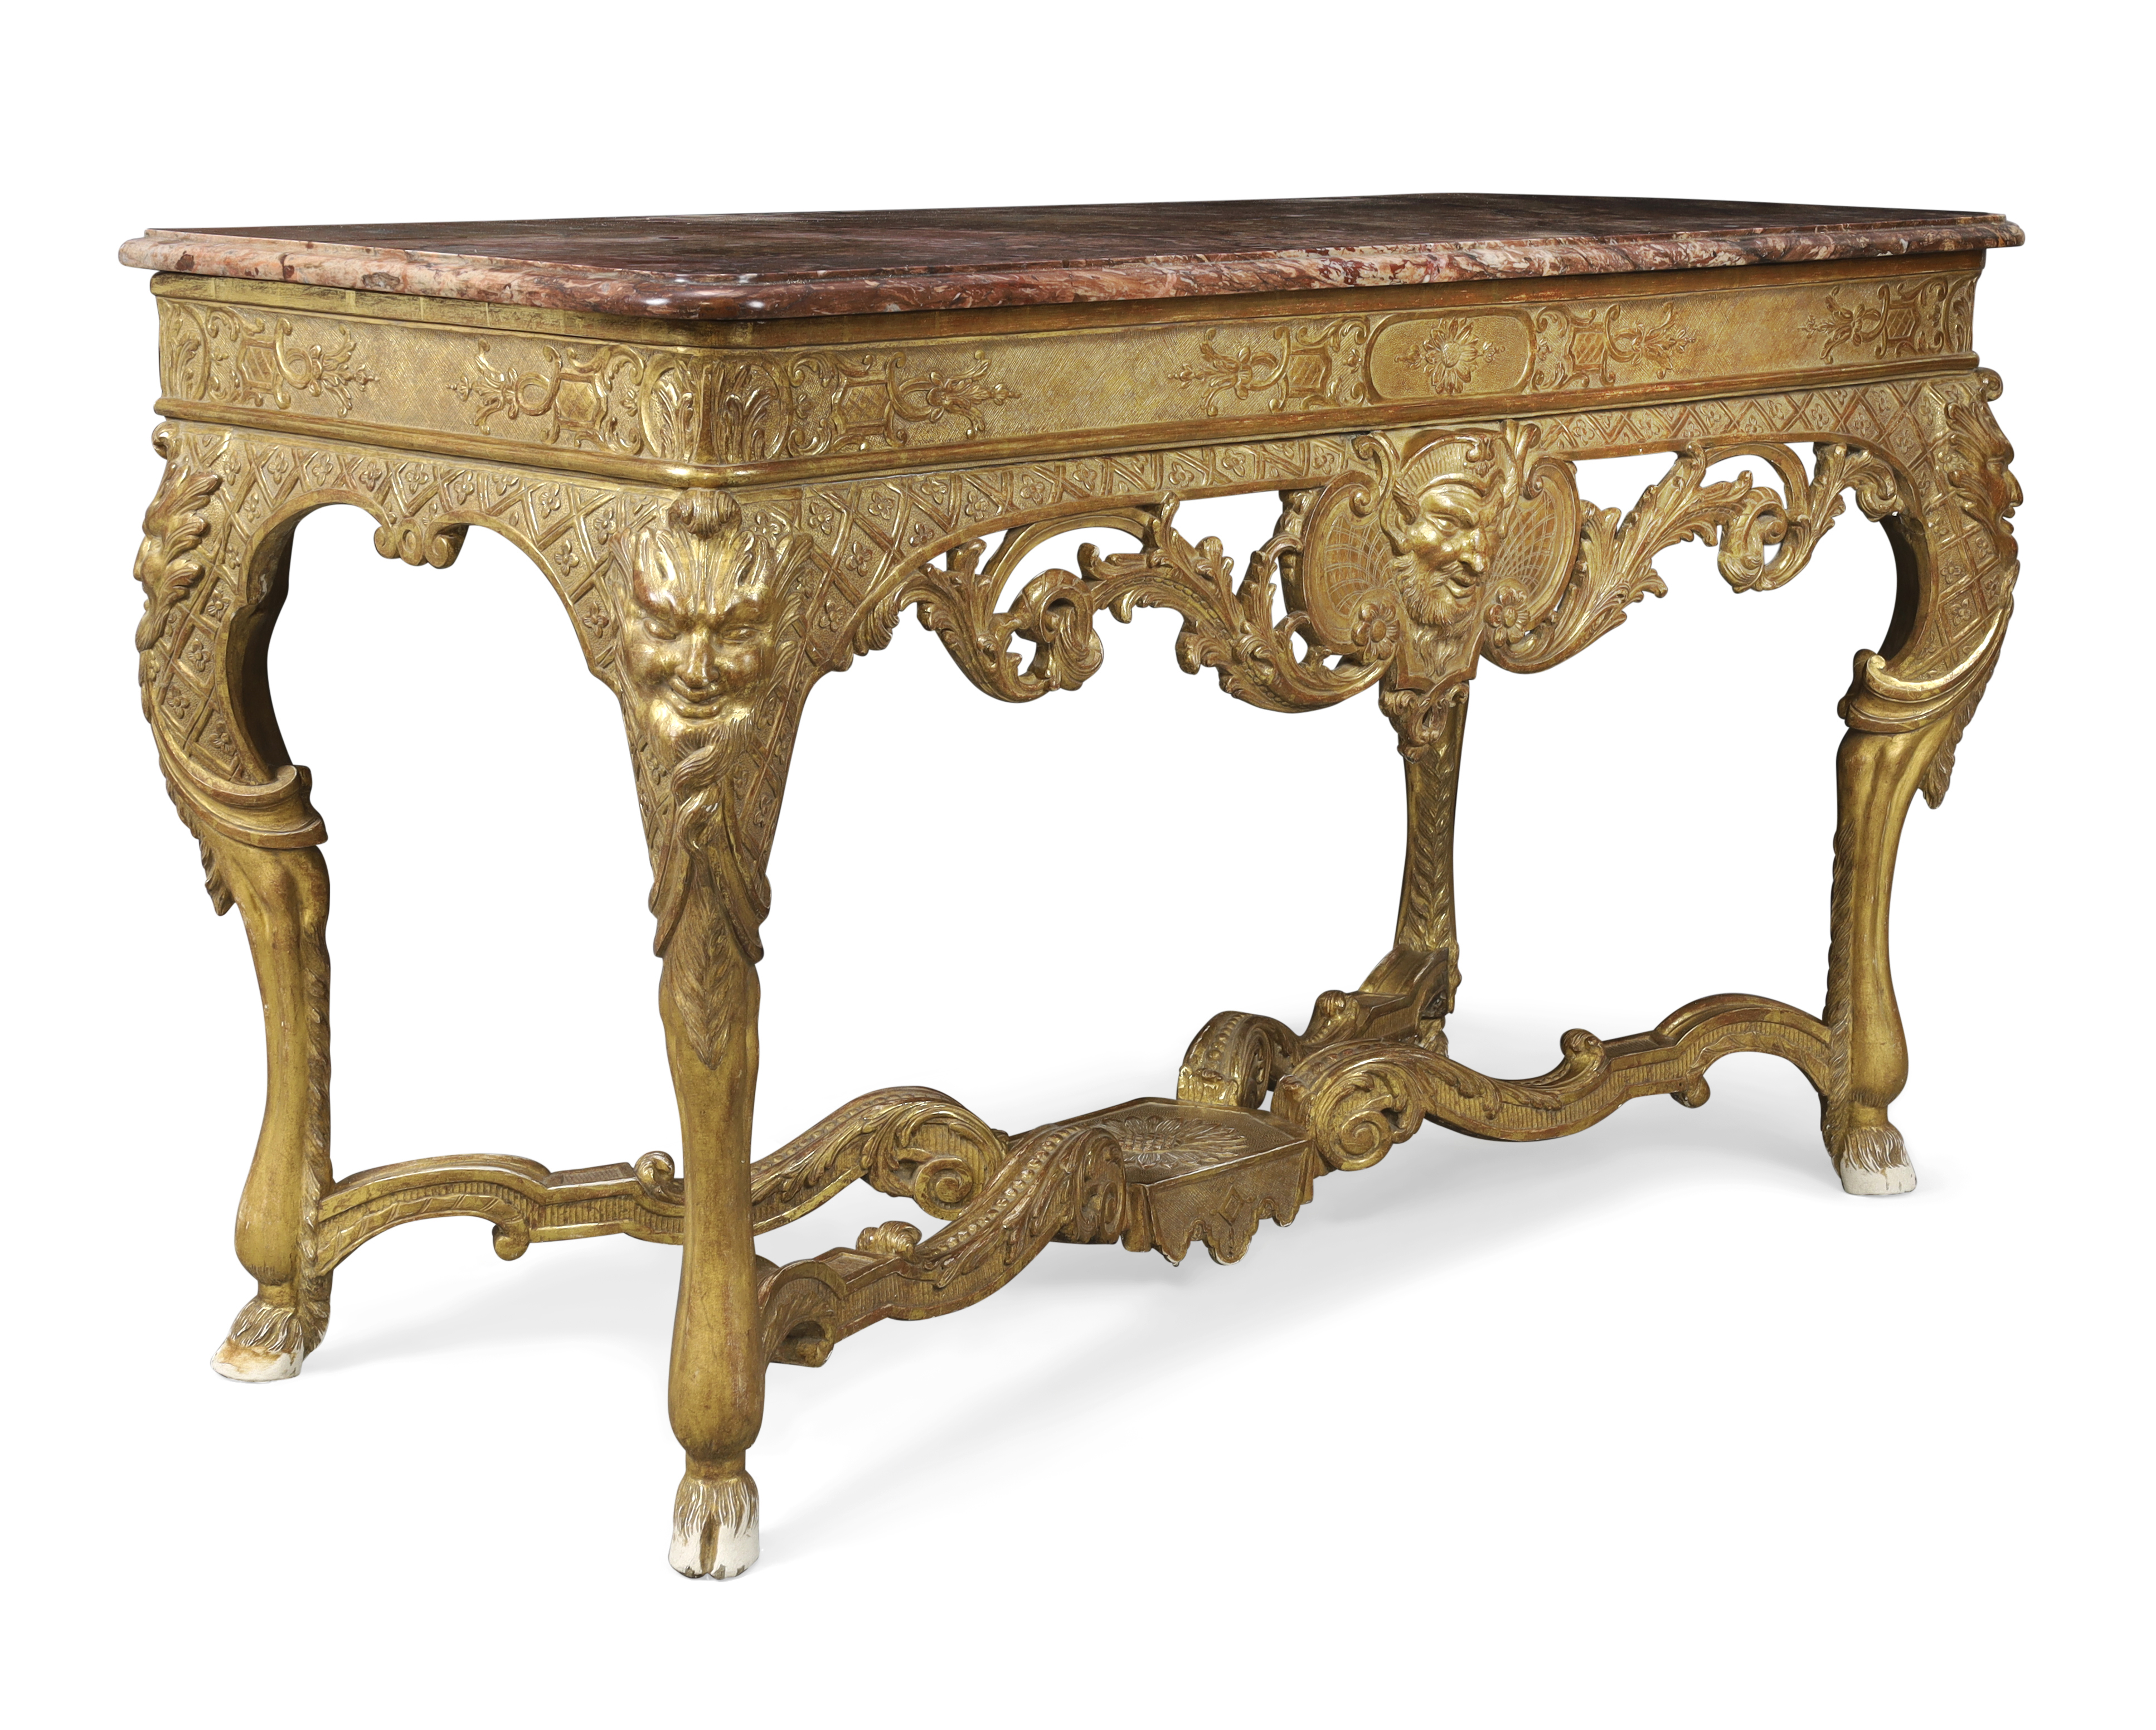 A Regence giltwood console table, First quarter 18th century, The marble top above carved frieze ... - Image 3 of 5